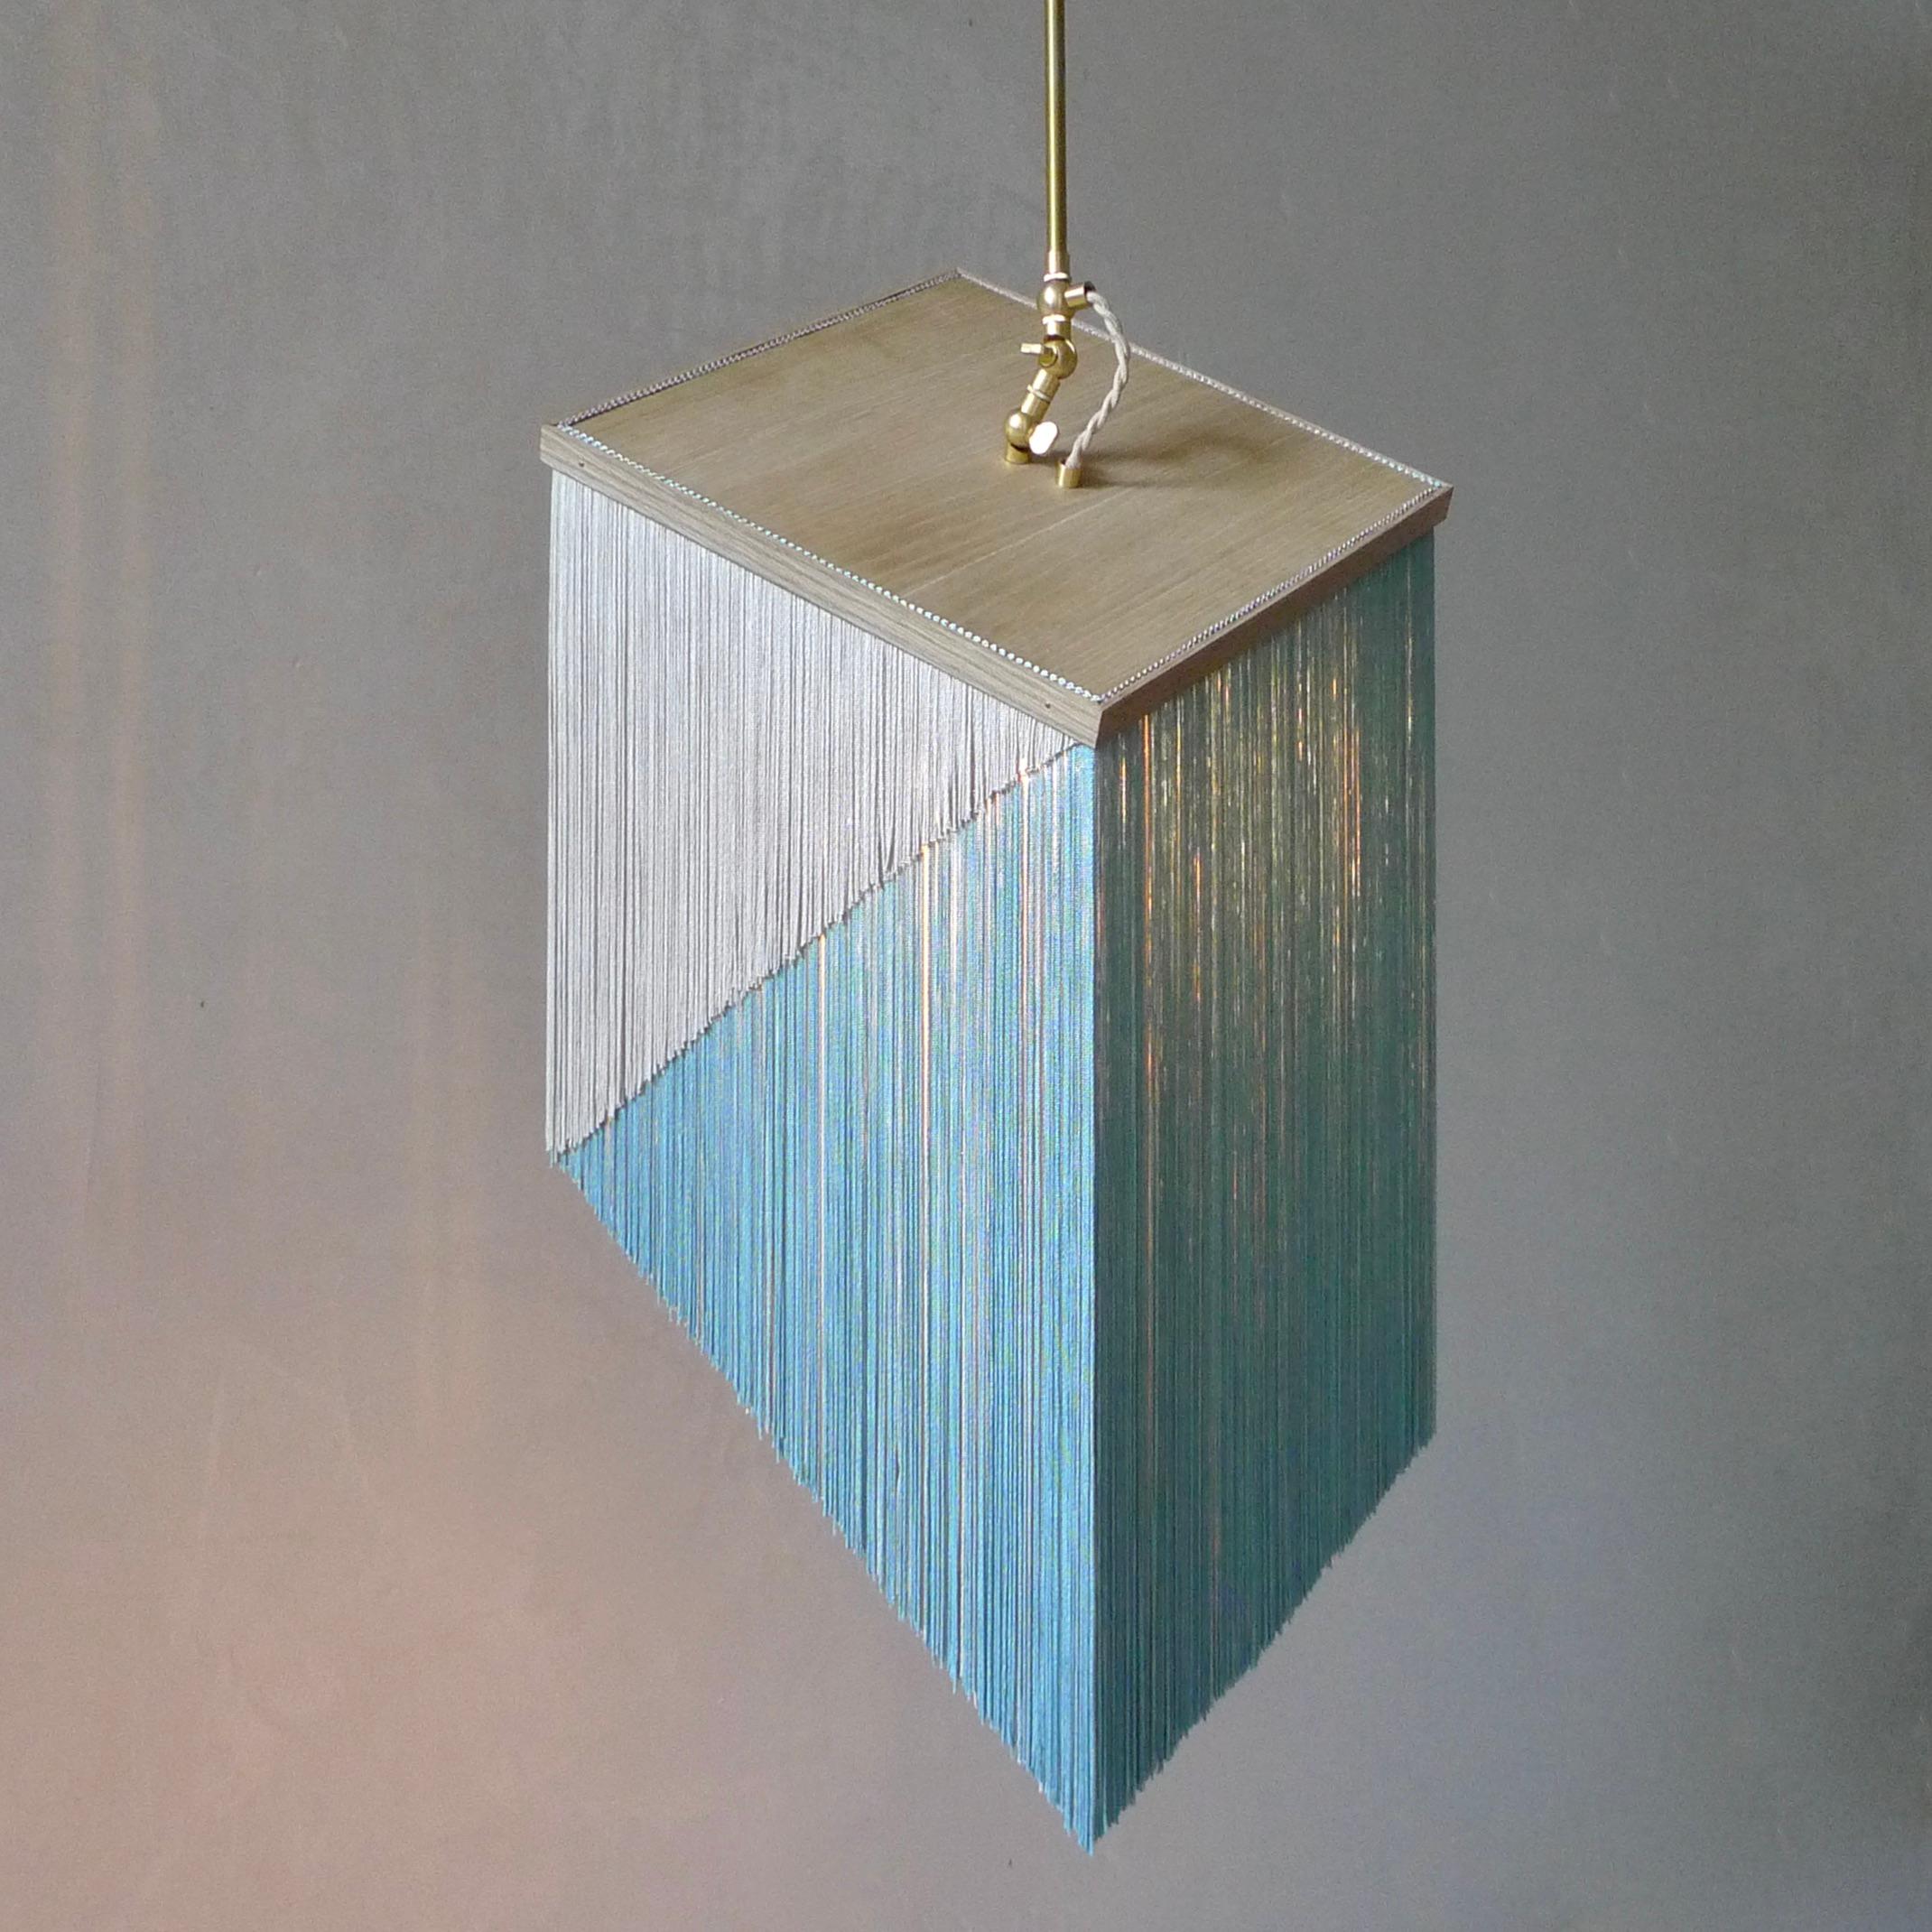 No. 25 pendant lamp by Sander Bottinga
Objet Size 3
Dimensions: H 46 -80 x W 31 x D 31 cm
Materials: brass, wood, leather, Viscose fringes
Variations available.

Handmade in brass, wood, leather and 3 double layered viscose fringes